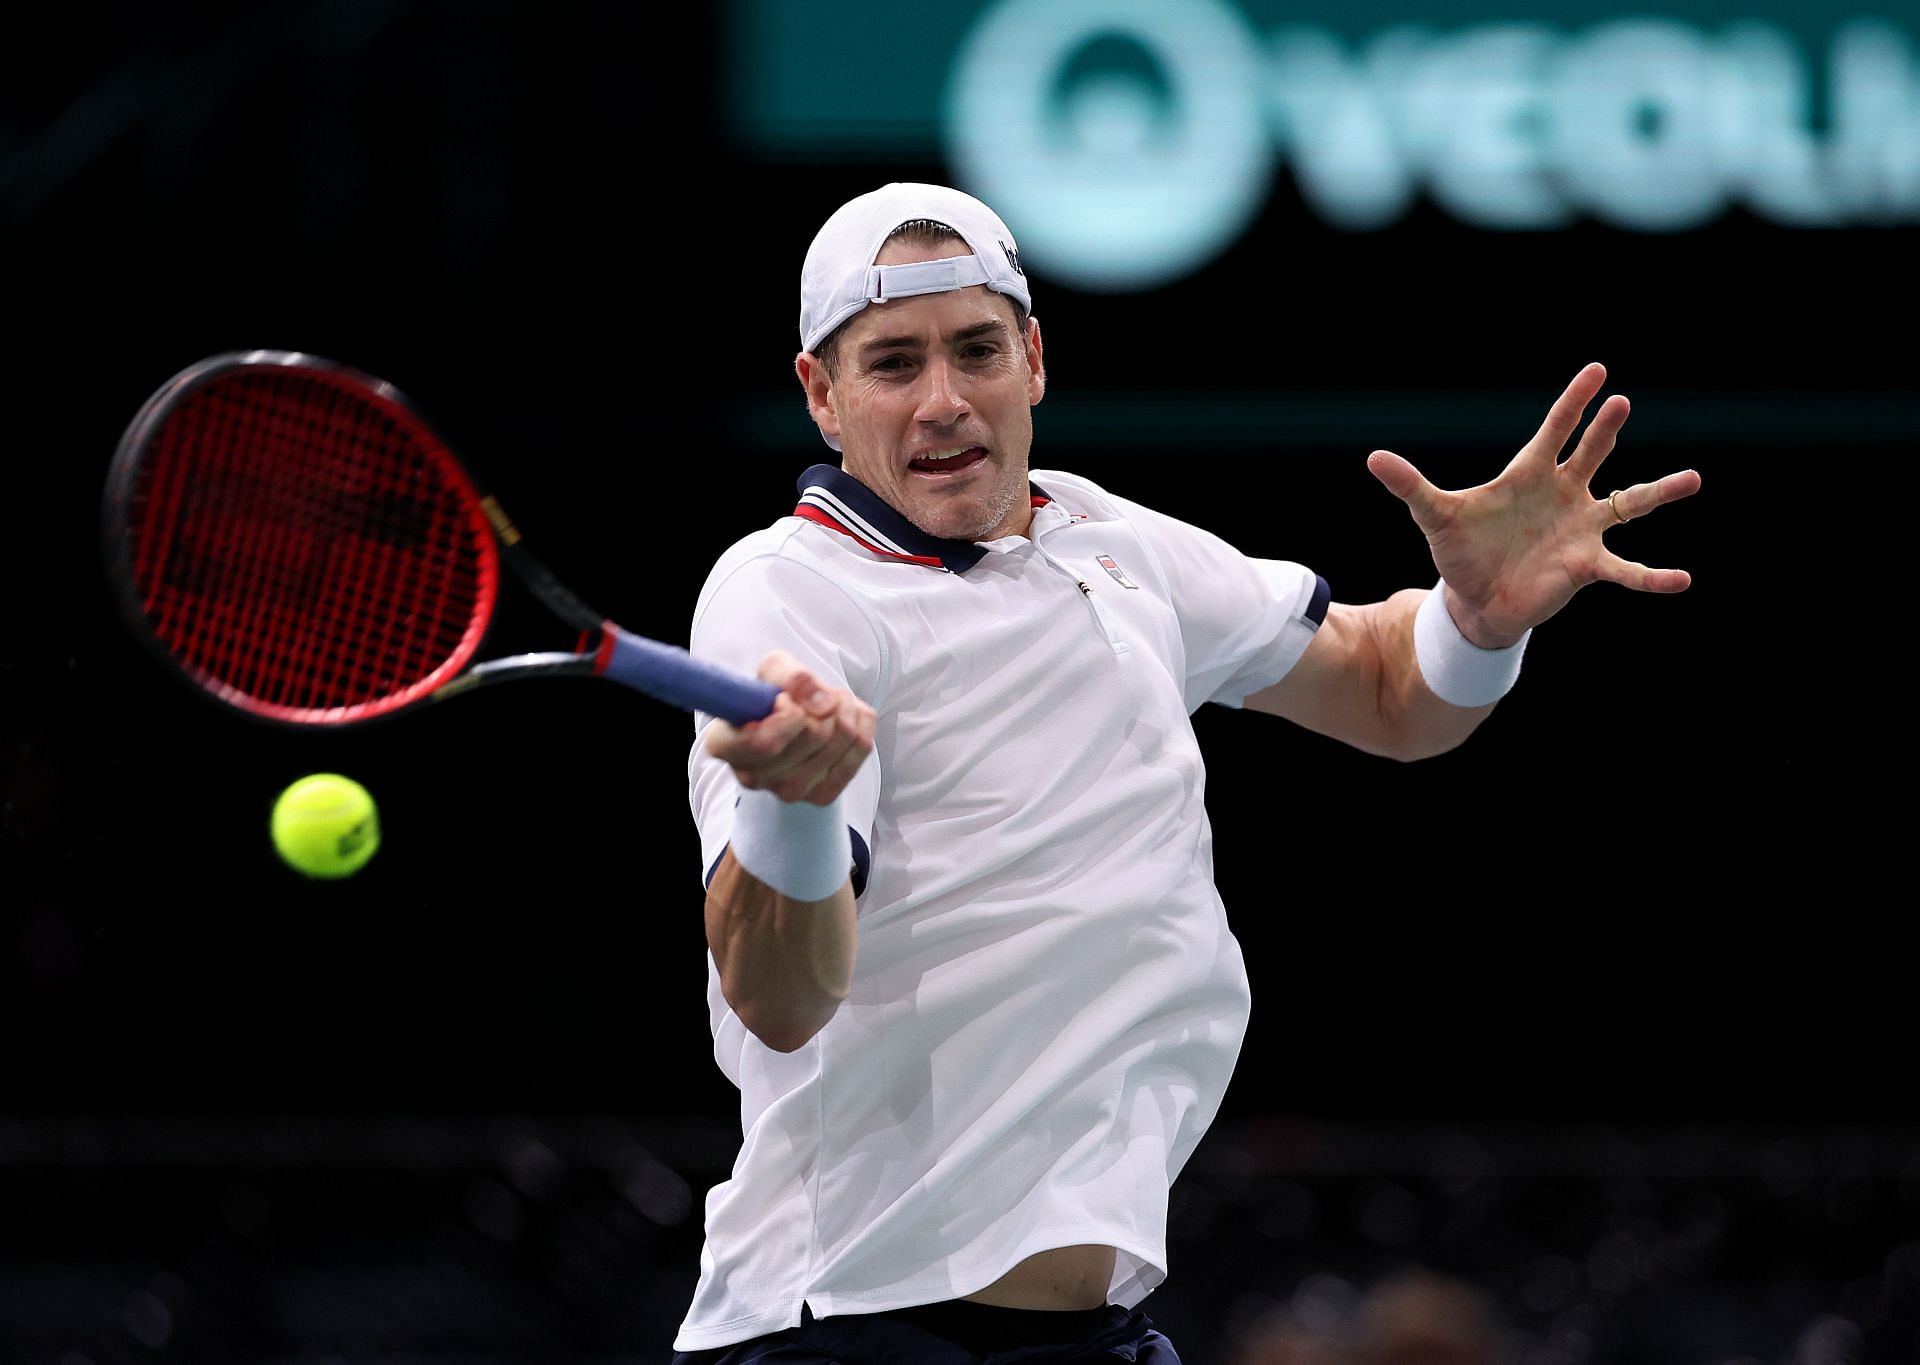 Isner is through to the last four.